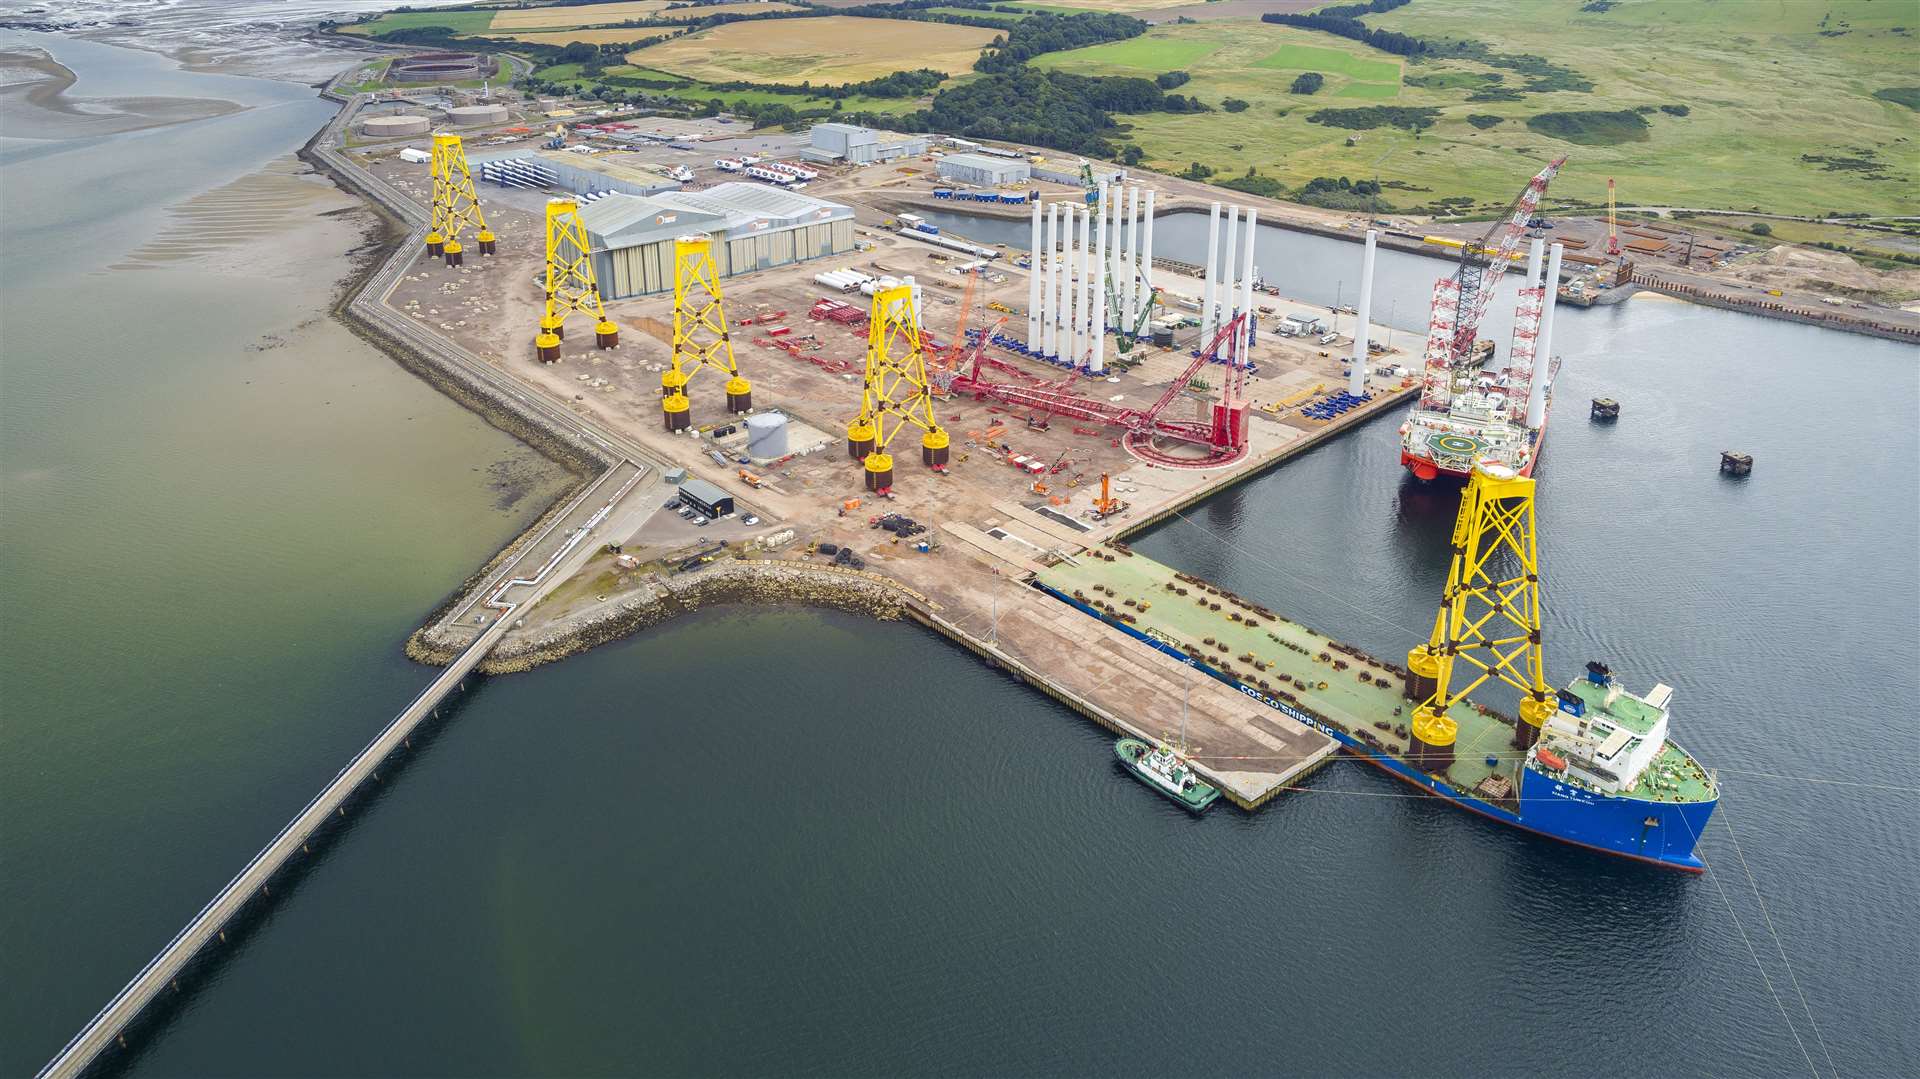 An agreement between Global Energy Group and Swiss company Proman could lead to the cration of a methanol production plant at Port of Nigg. Photograph: Malcolm McCurrach | New Wave Images UK